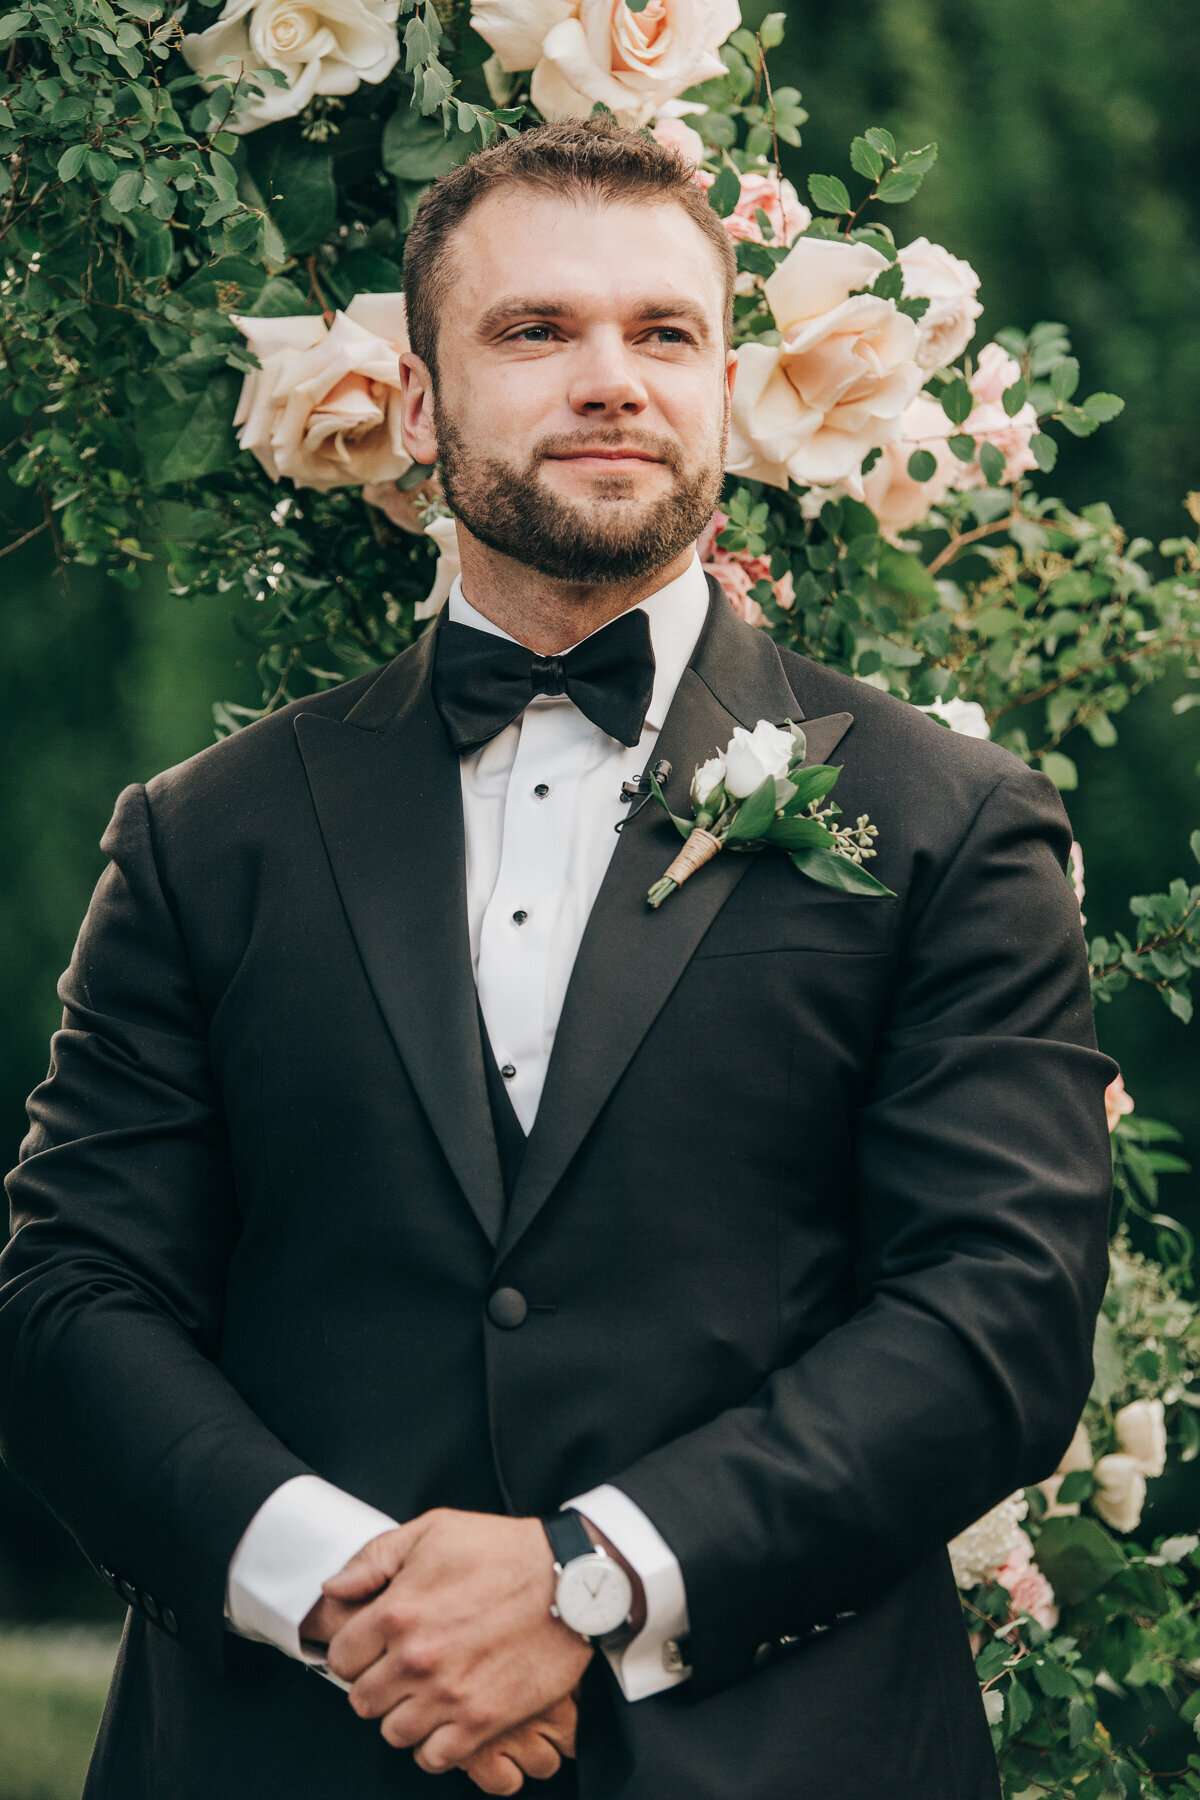 Candid first look of emotional groom photographed by Nova Markina